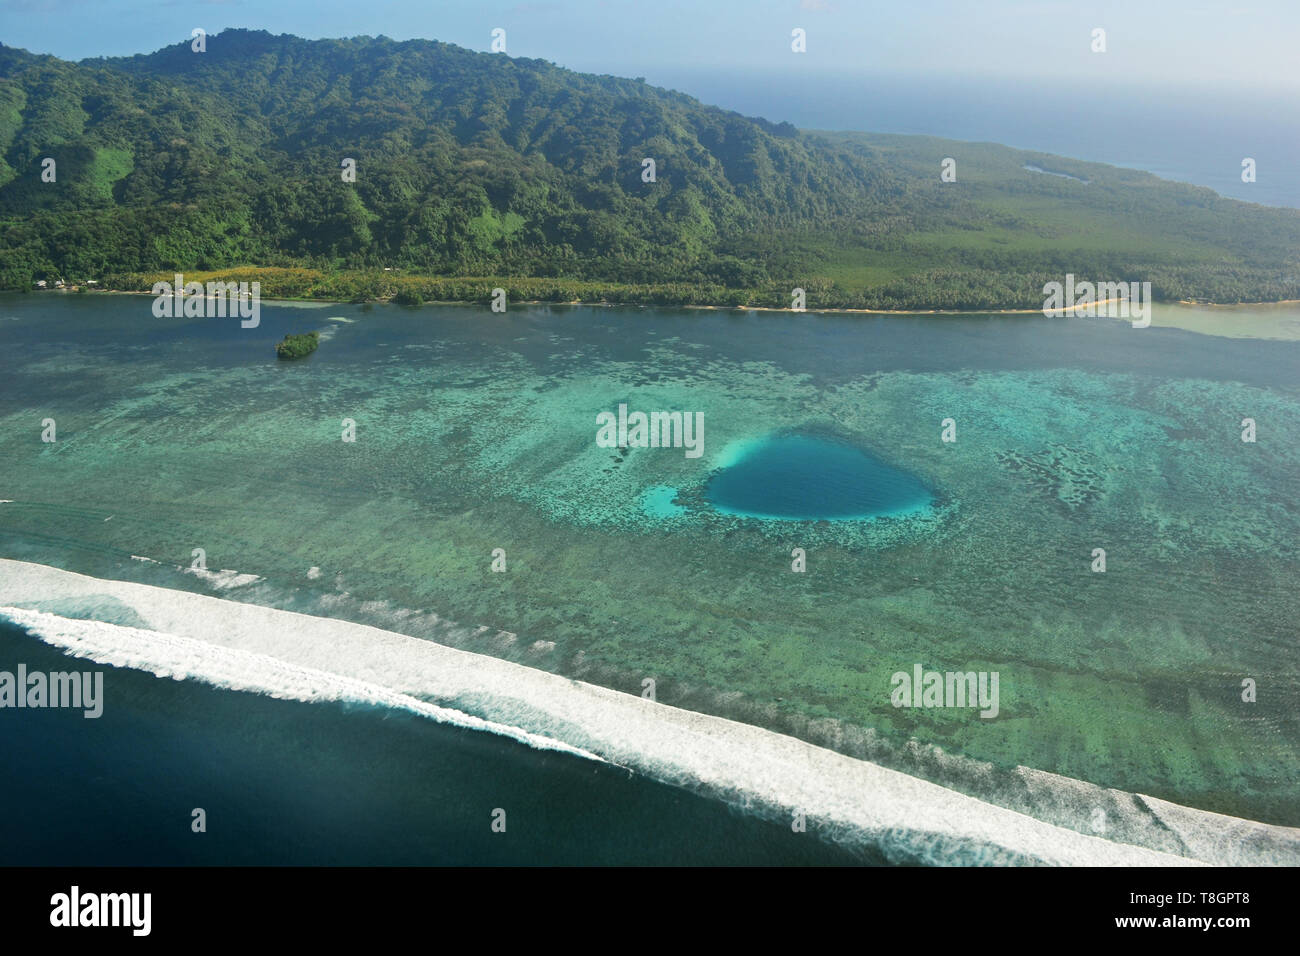 Aerial view of Kosrae island, Federated States of Micronesia Stock Photo